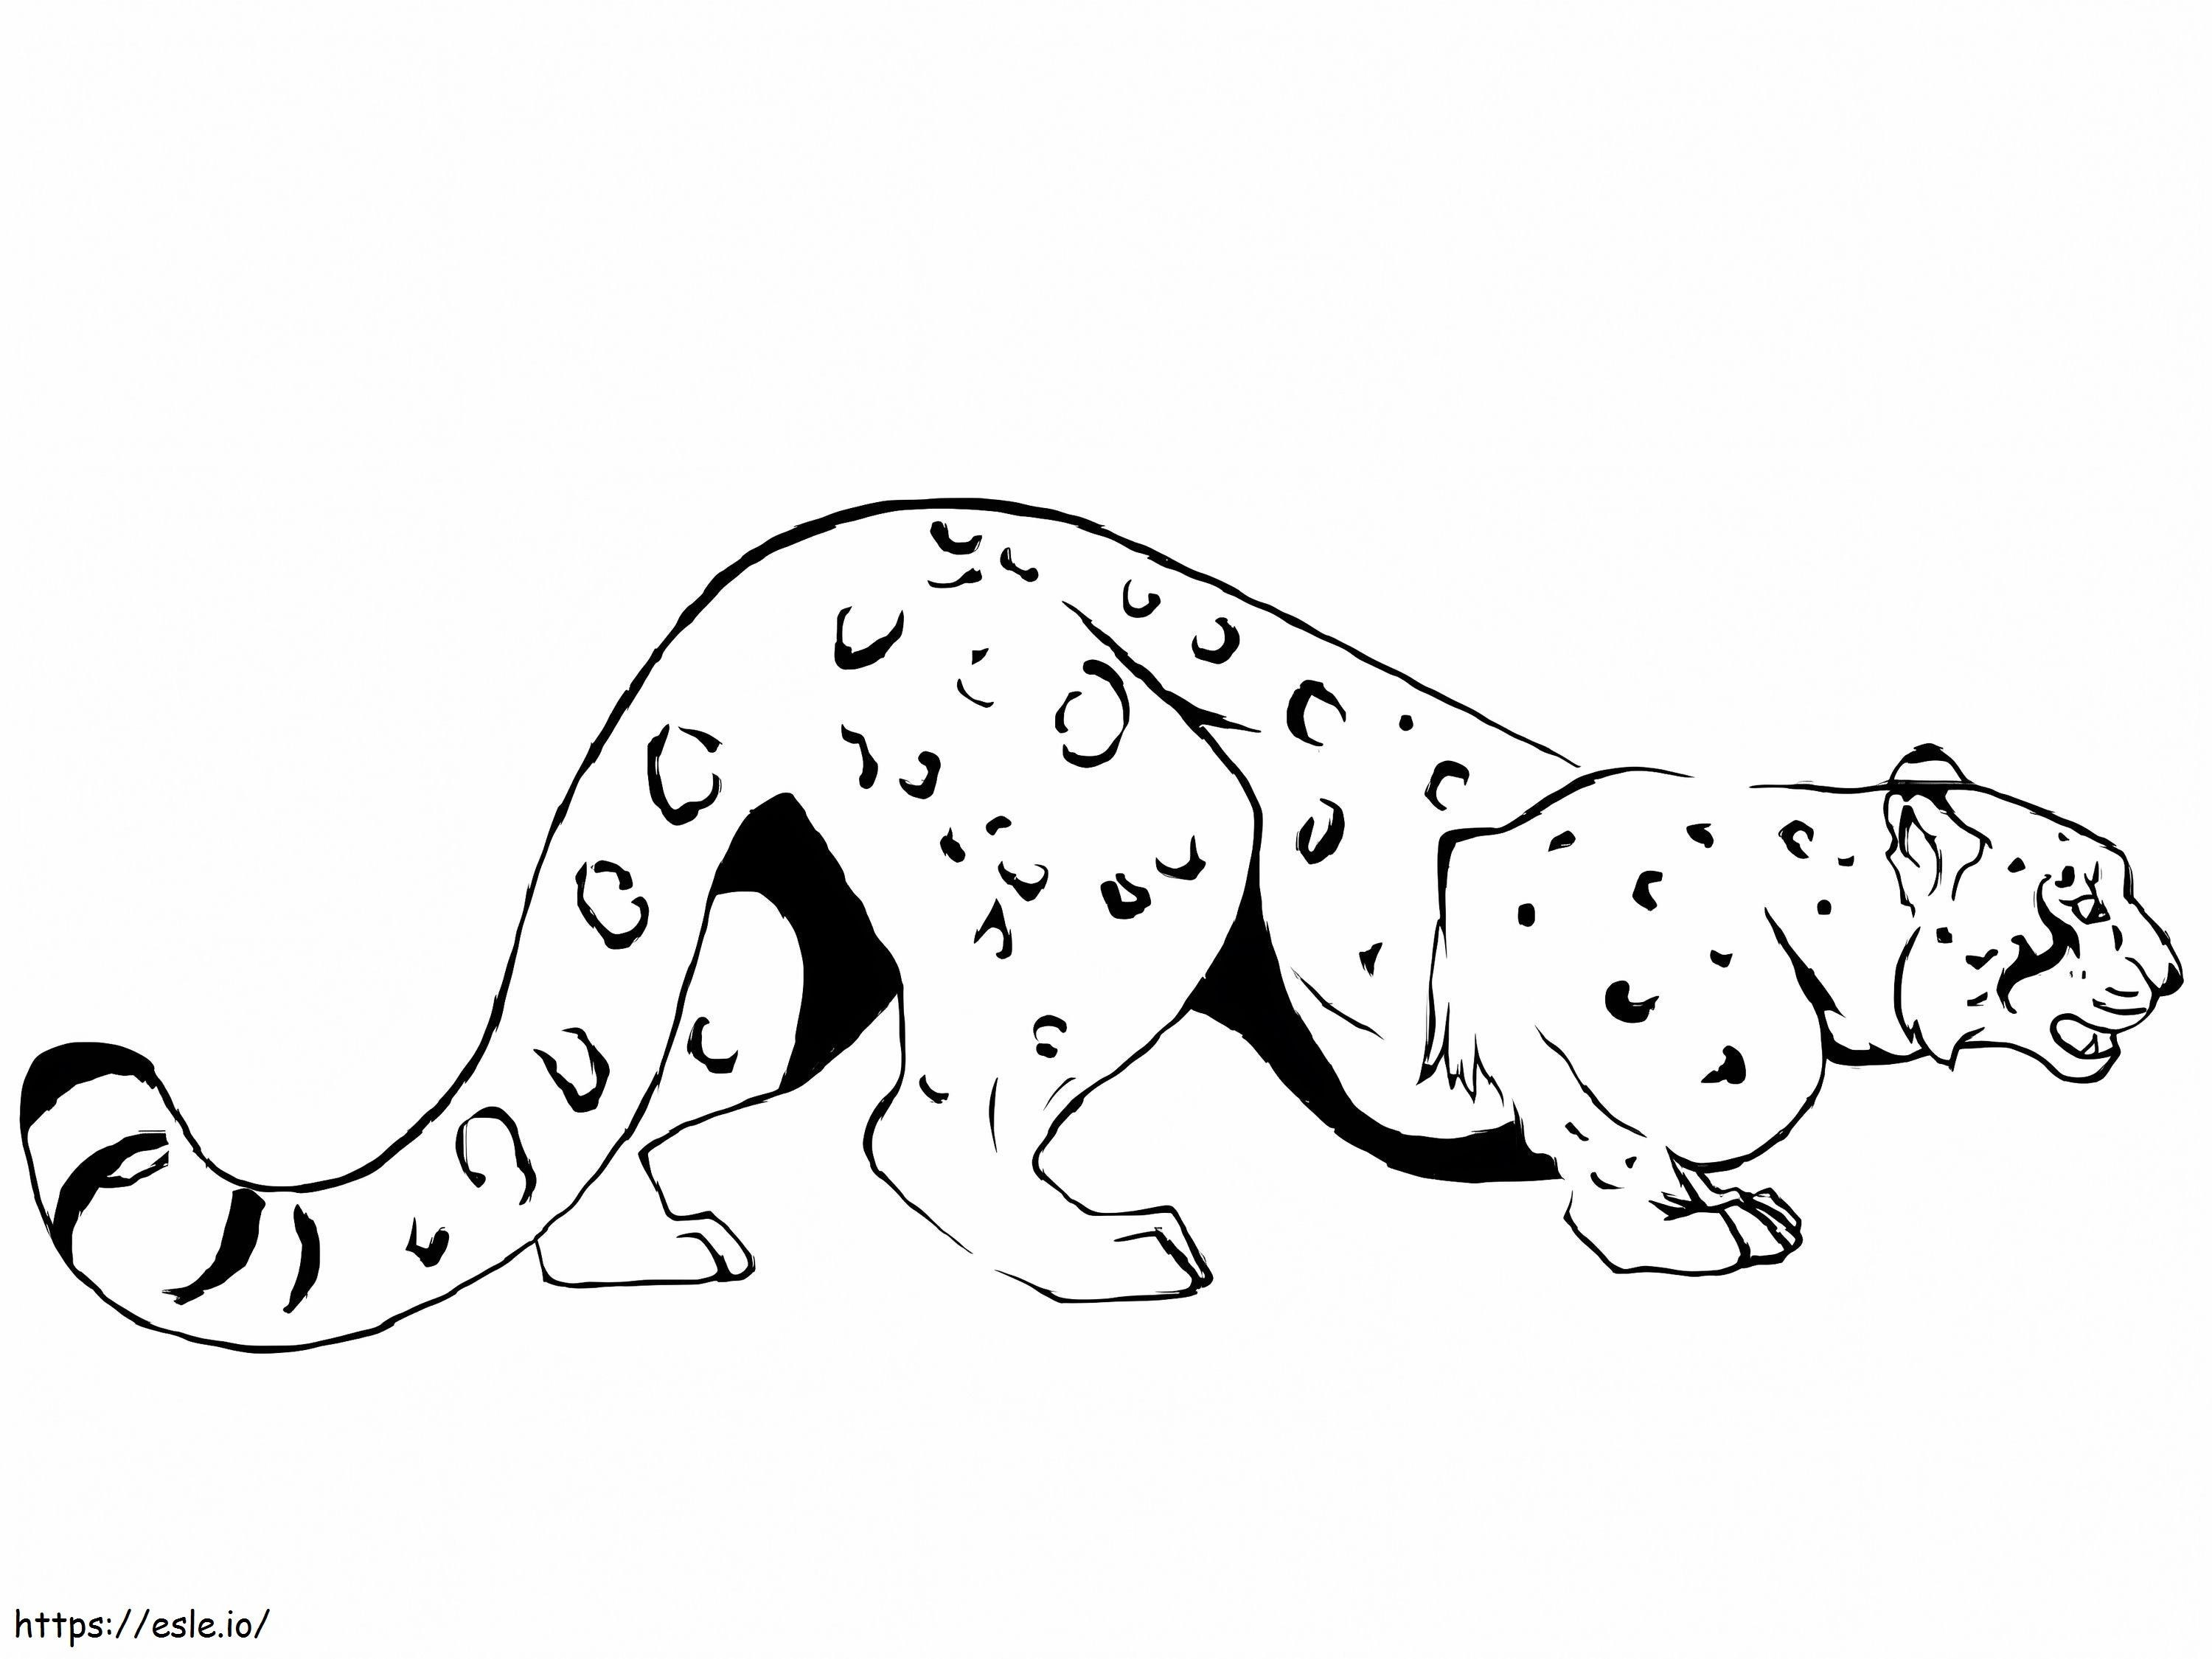 The Hunting Leopard coloring page